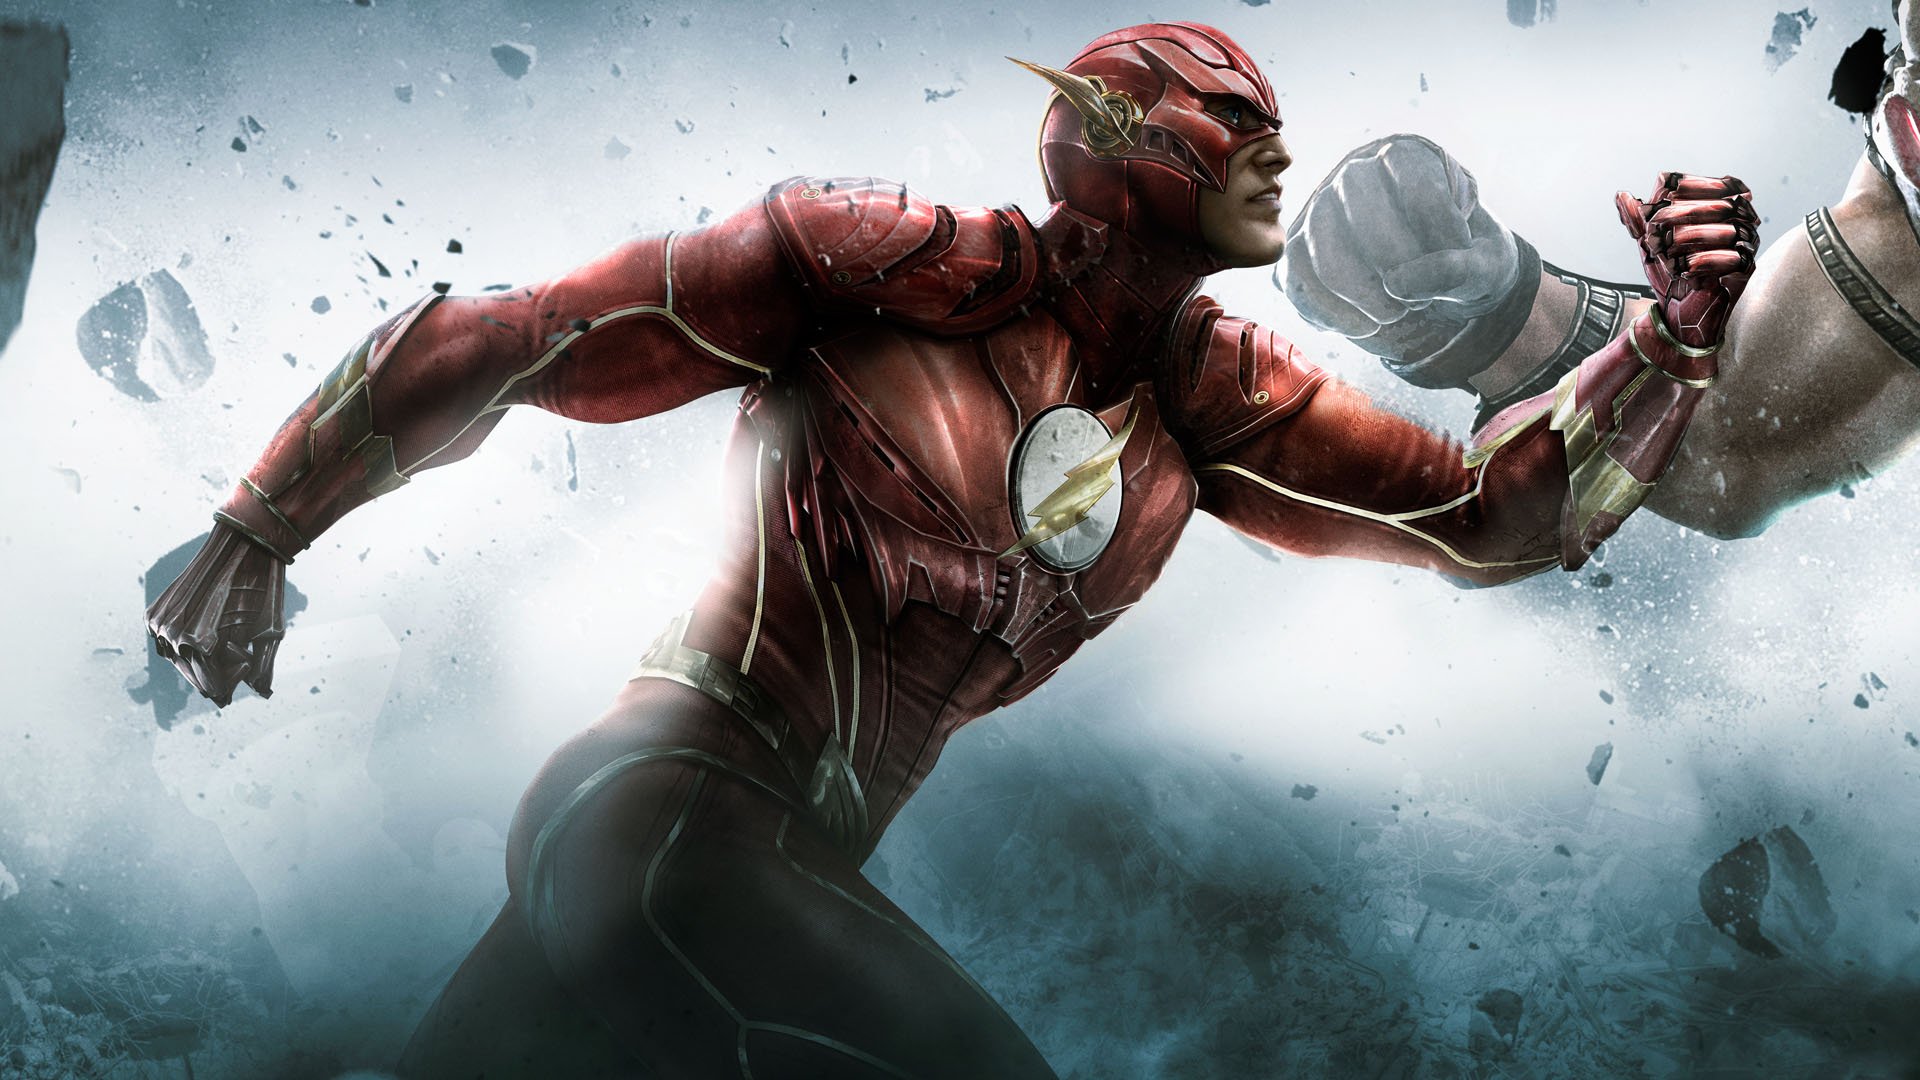 EZRA MILLER CONFIRMS DETAILS ABOUT HIS FLASH IN THE DCU